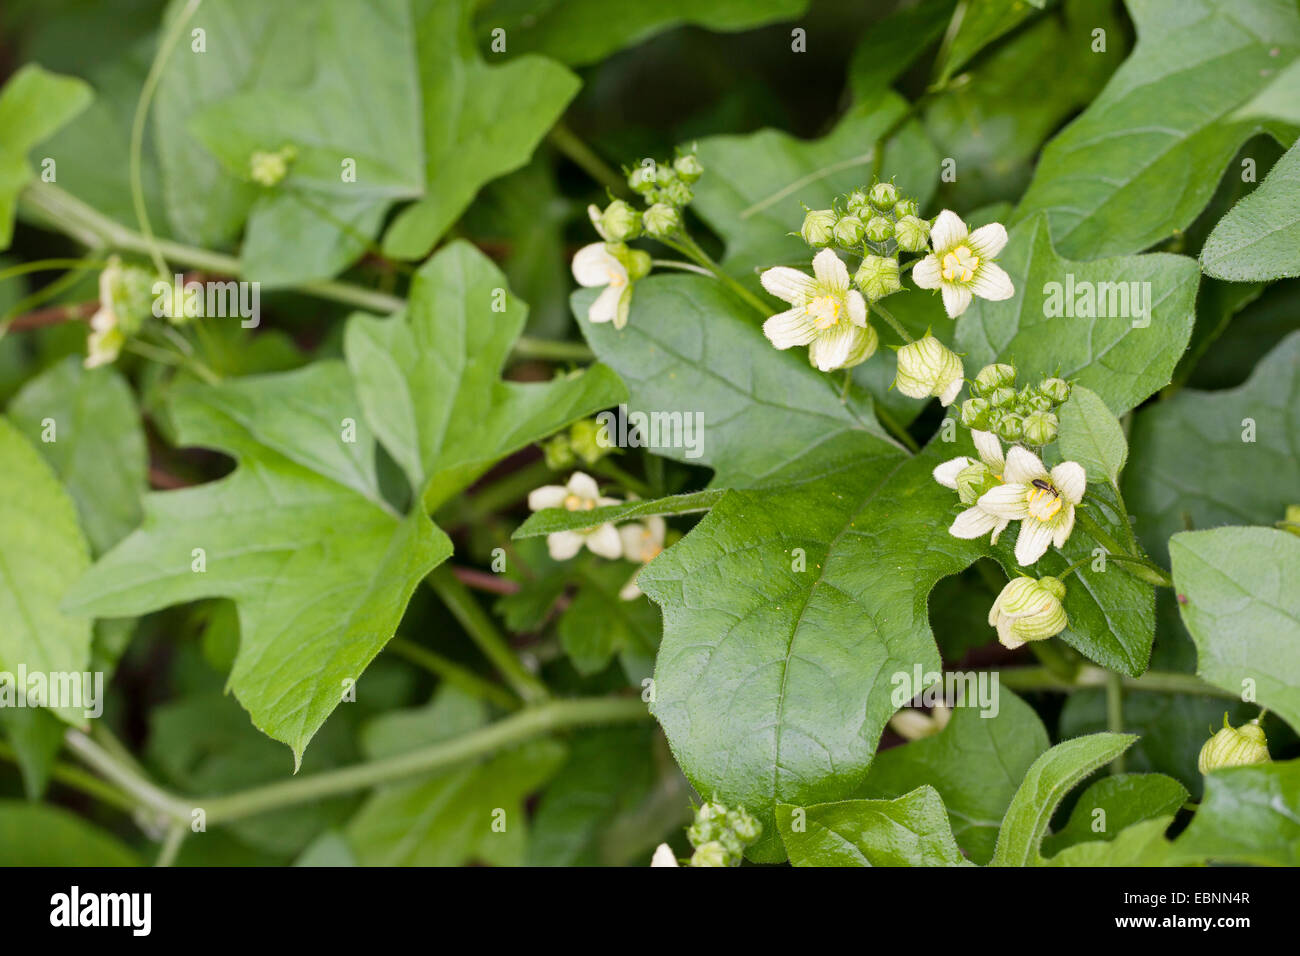 White bryony, Red bryony (Bryonia dioica, Bryonia cretica ssp. dioica), leaves and flowers, Germany Stock Photo